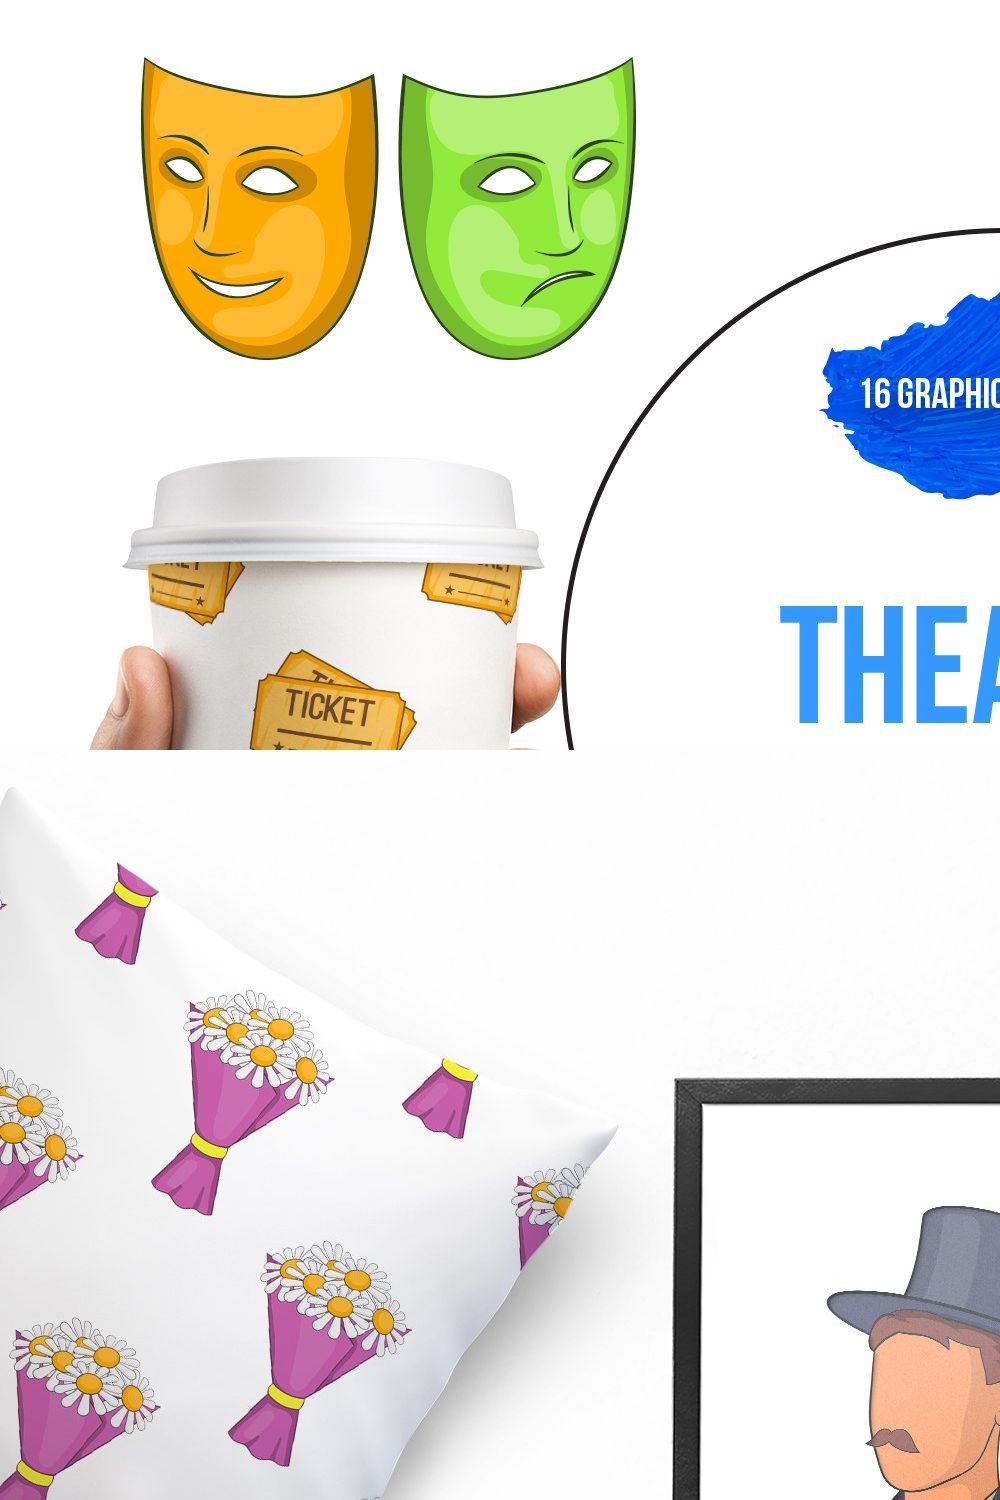 Theatre icons set, cartoon style pinterest preview image.